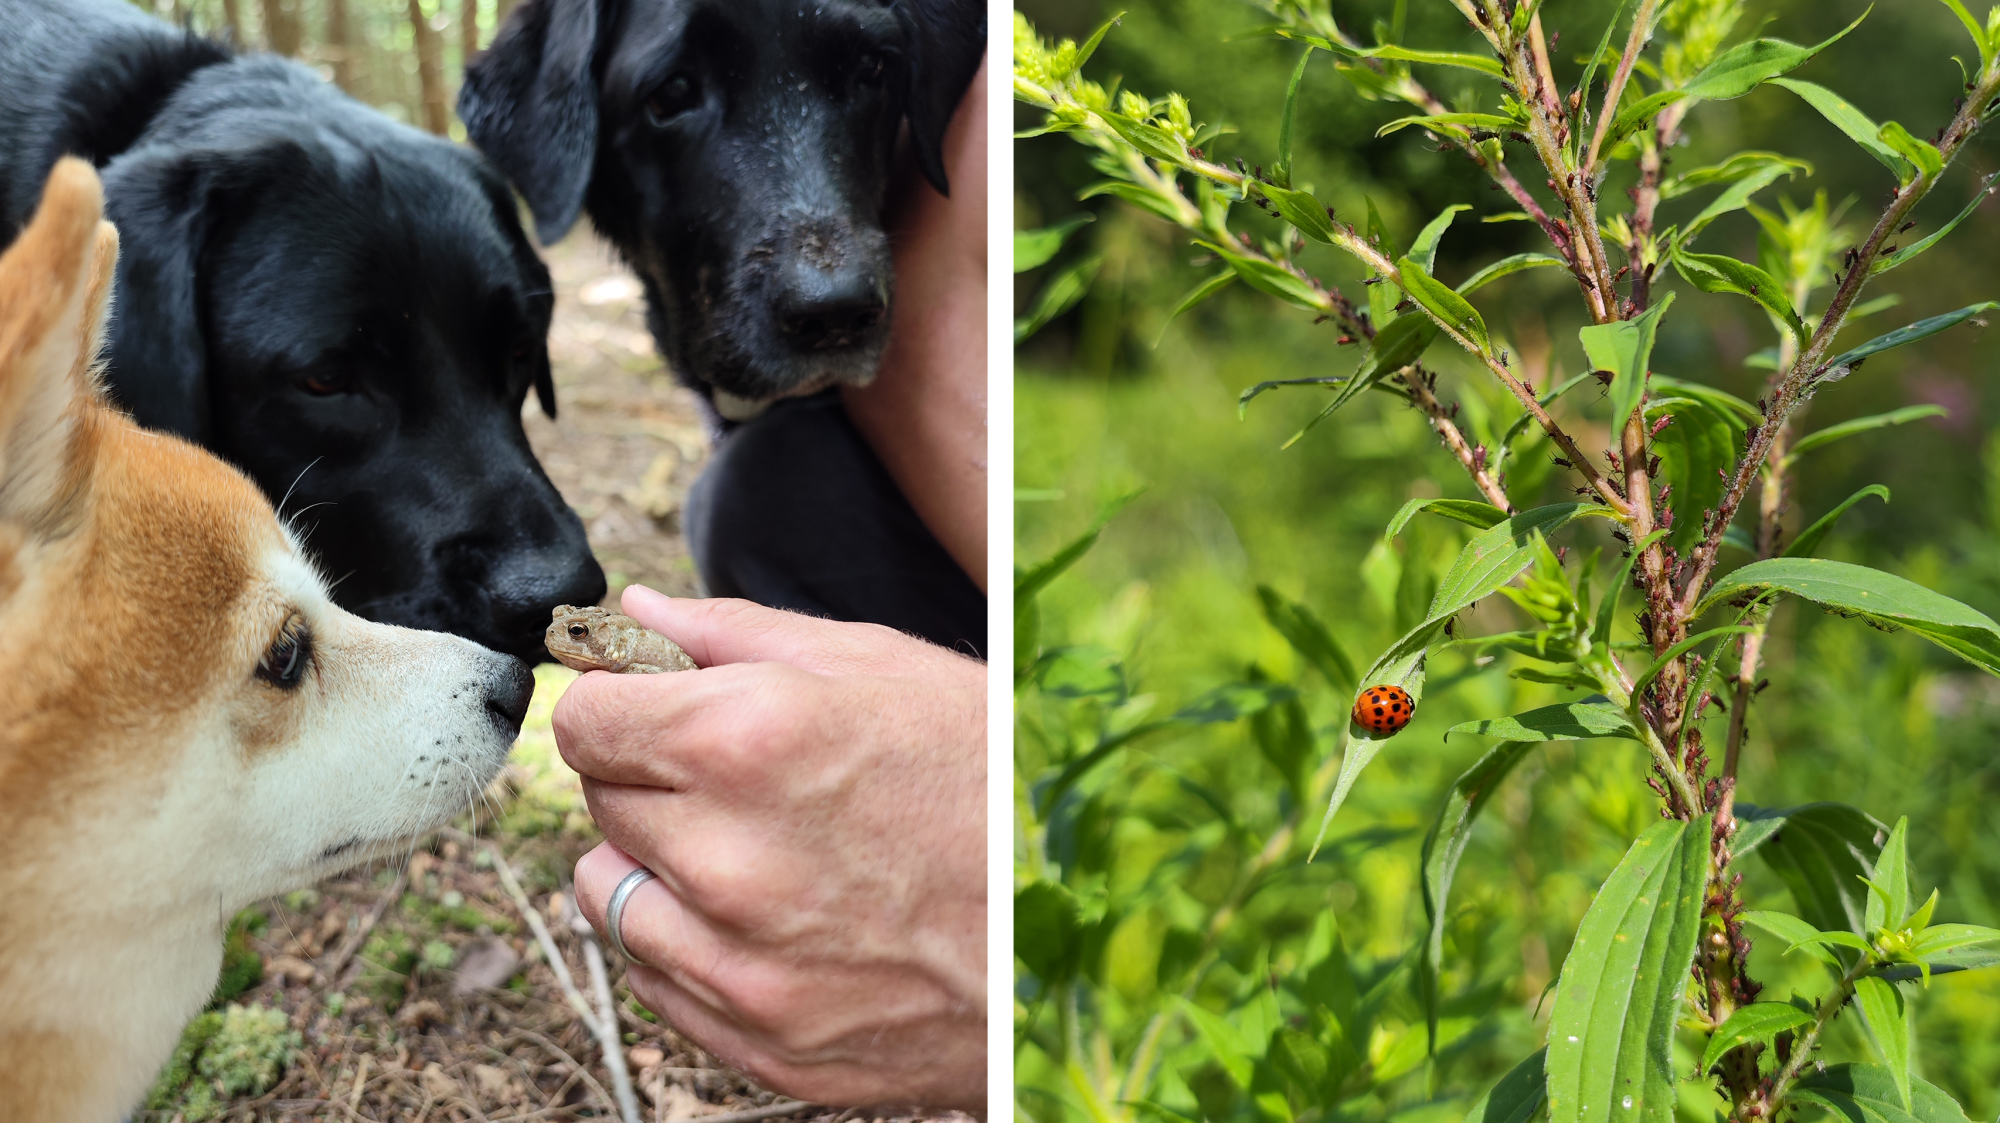 Left: three dogs curiously sniffing small frog. Right: Close up of lady bug on plant covered in aphids